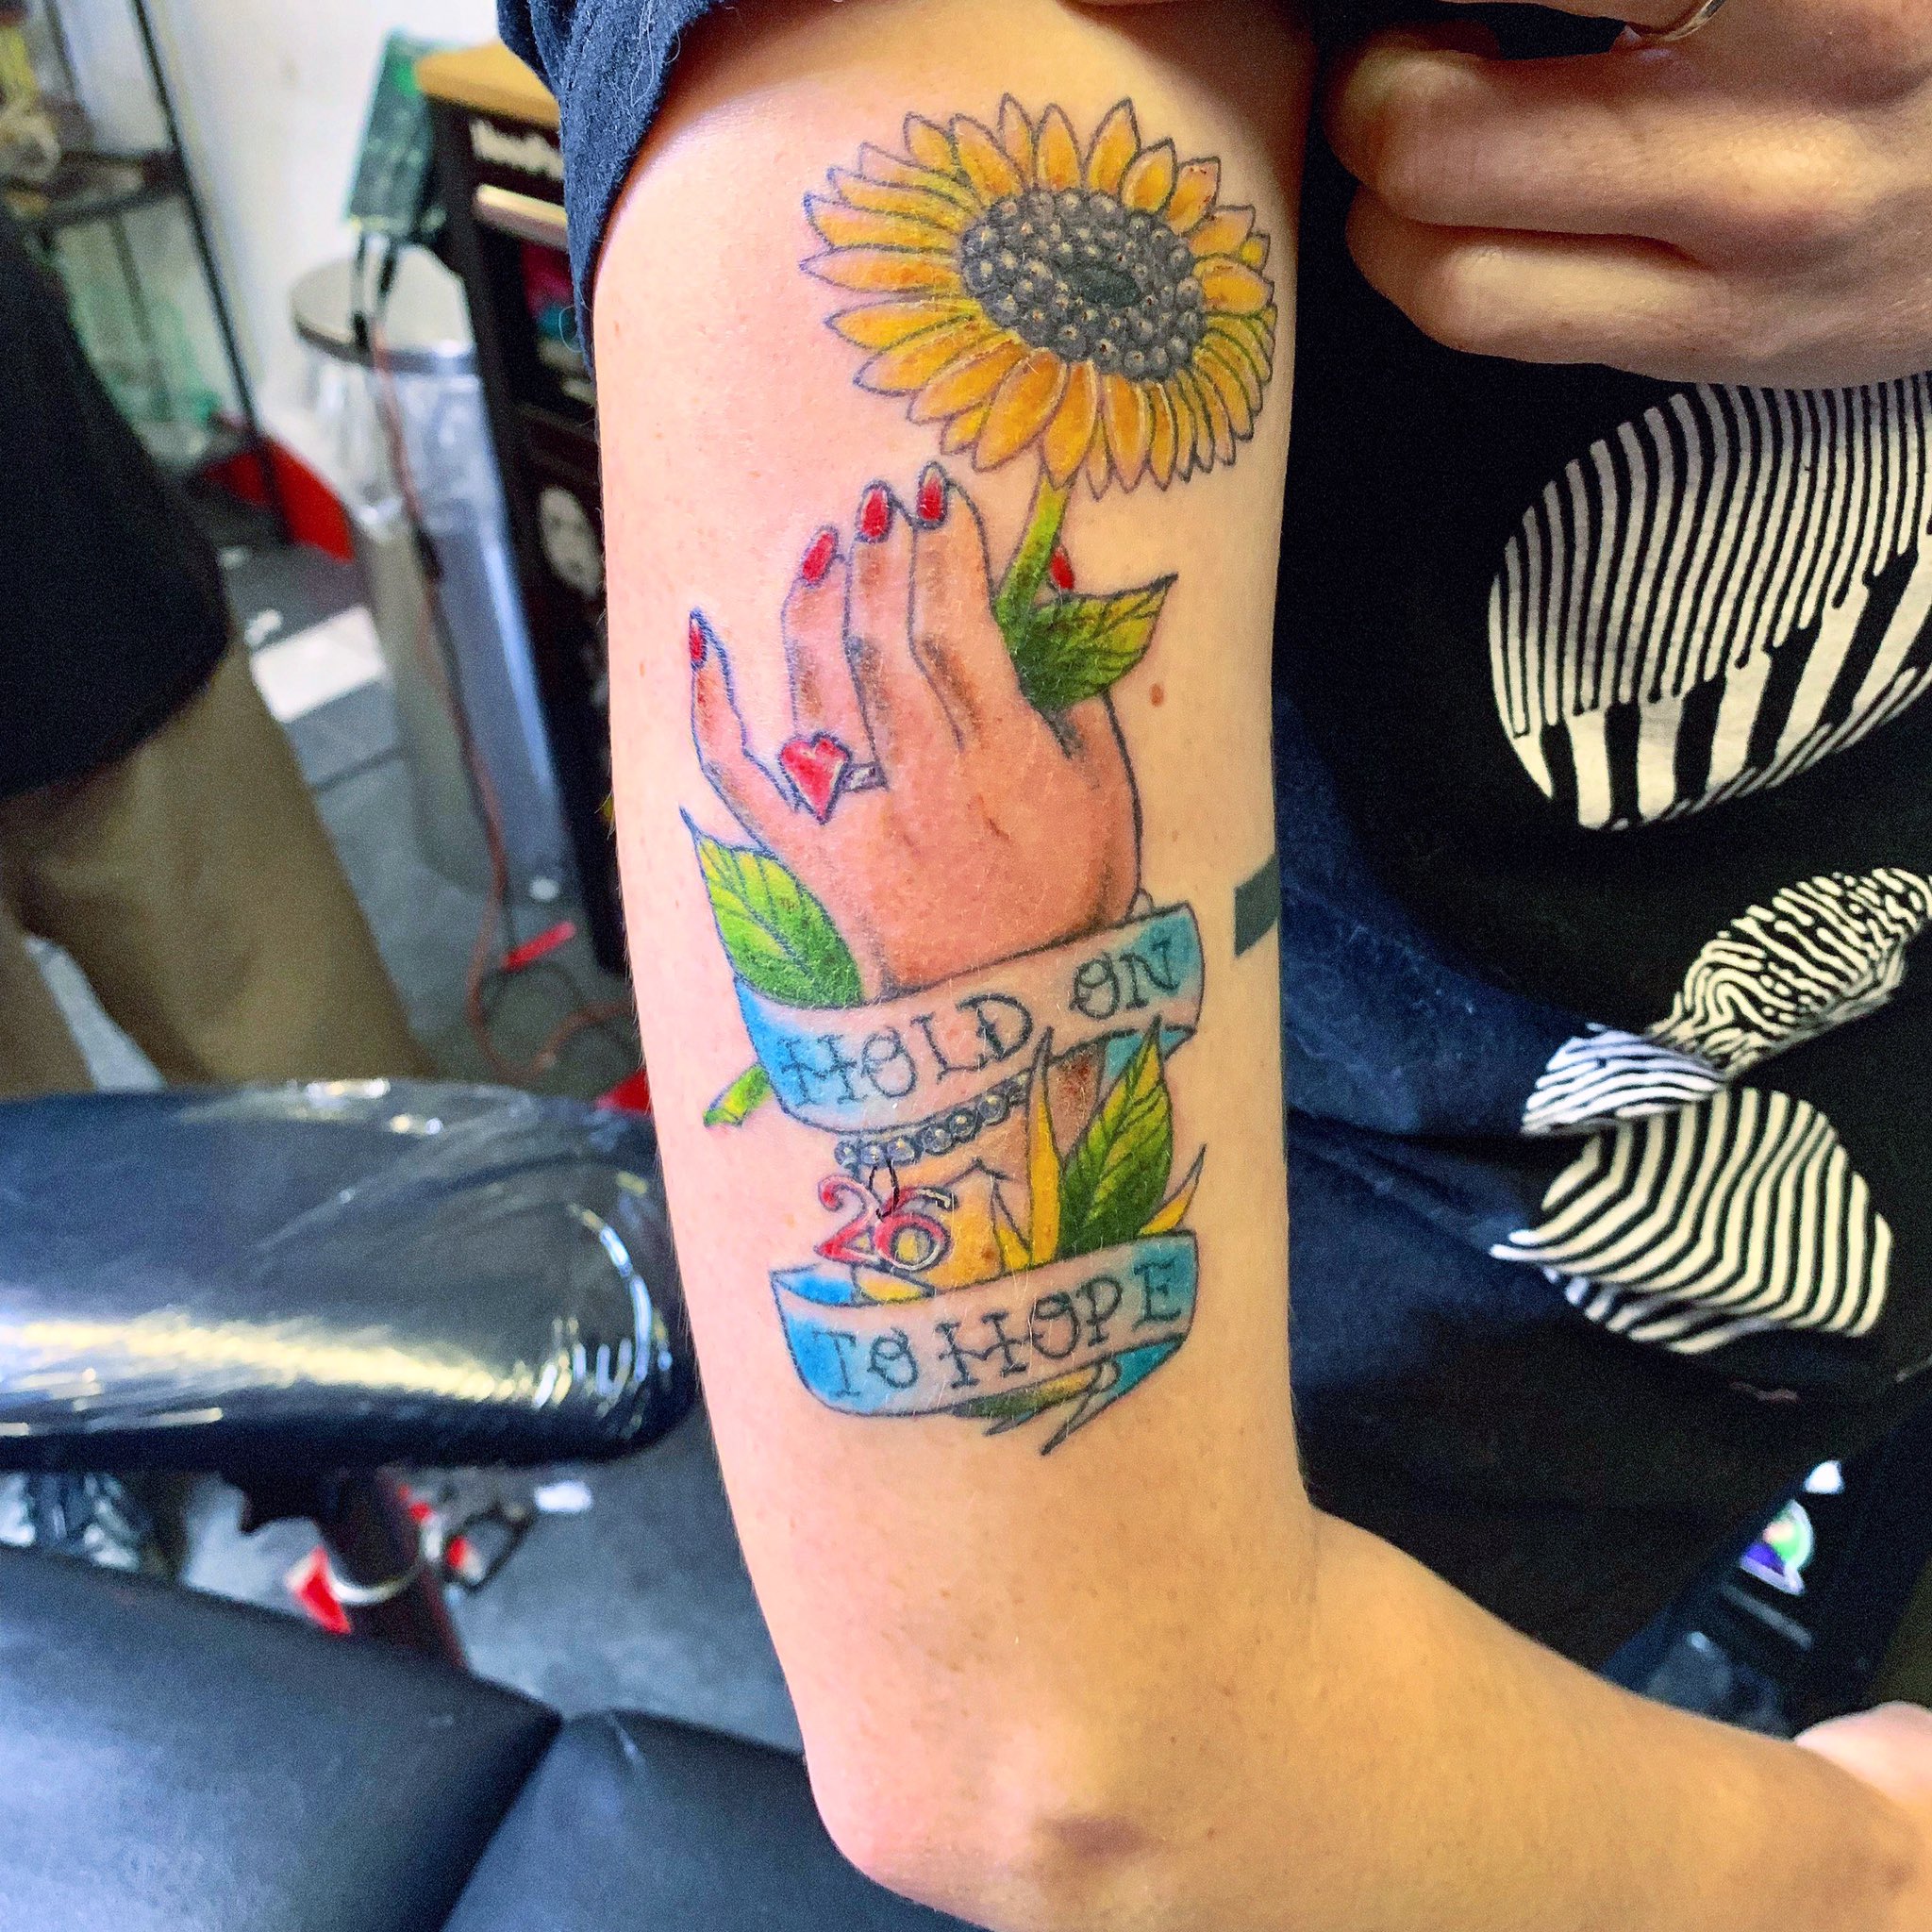 Alexis Wilson on X: Finally got my Paramore tattoo colored in! I was 26  when I got it and that was the most difficult year for me mentally. If you  struggle with